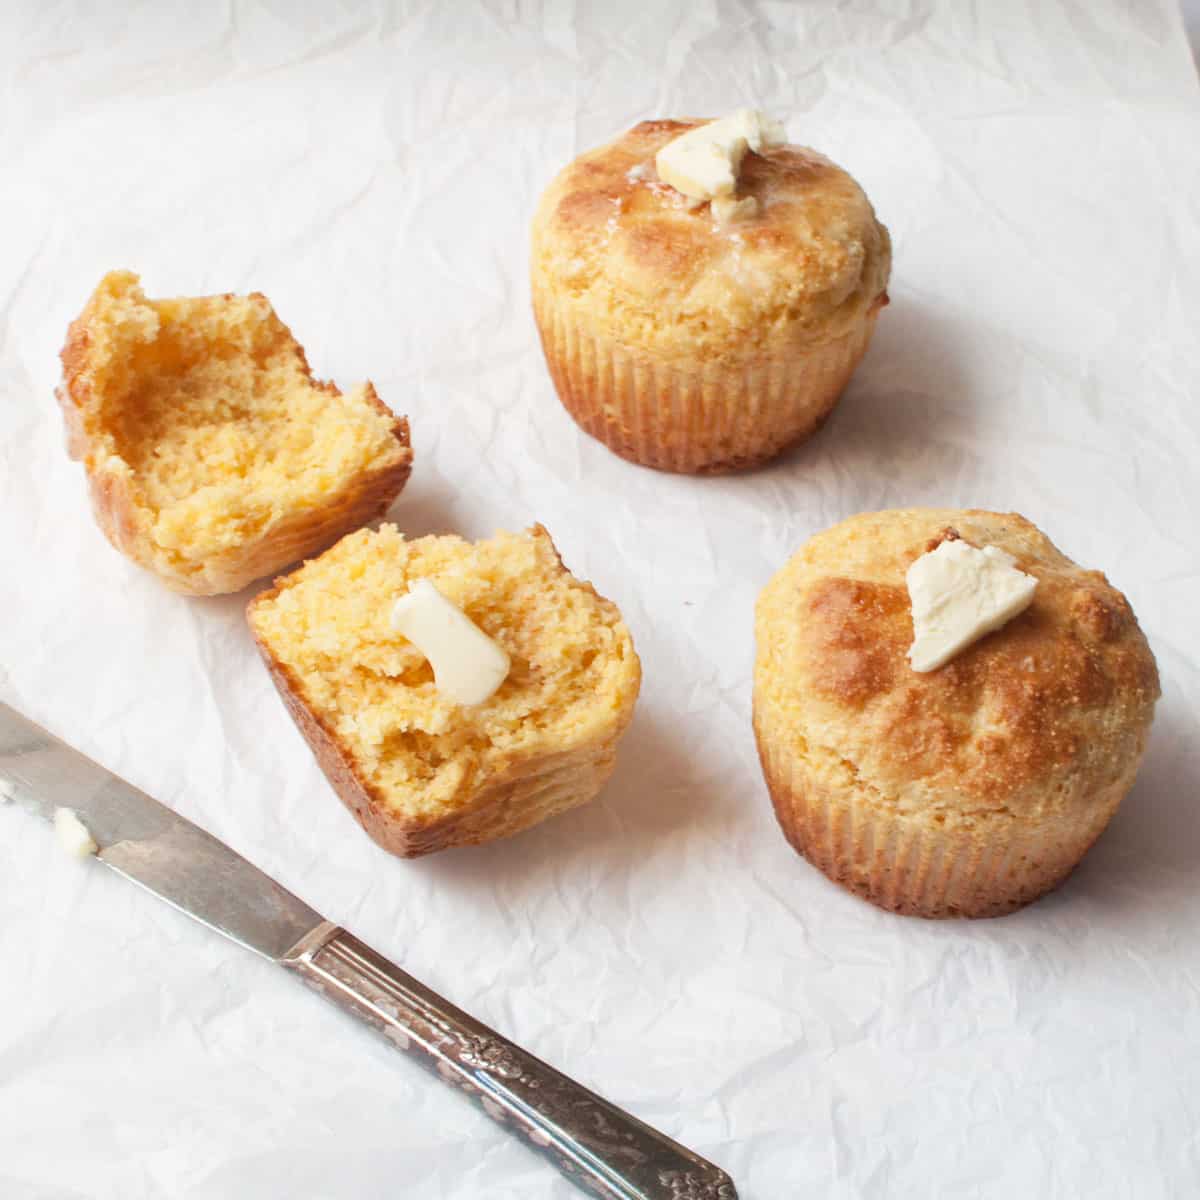 Jumbo corn muffins with butter on top on a white background. There is a butterknife with butter beside them.